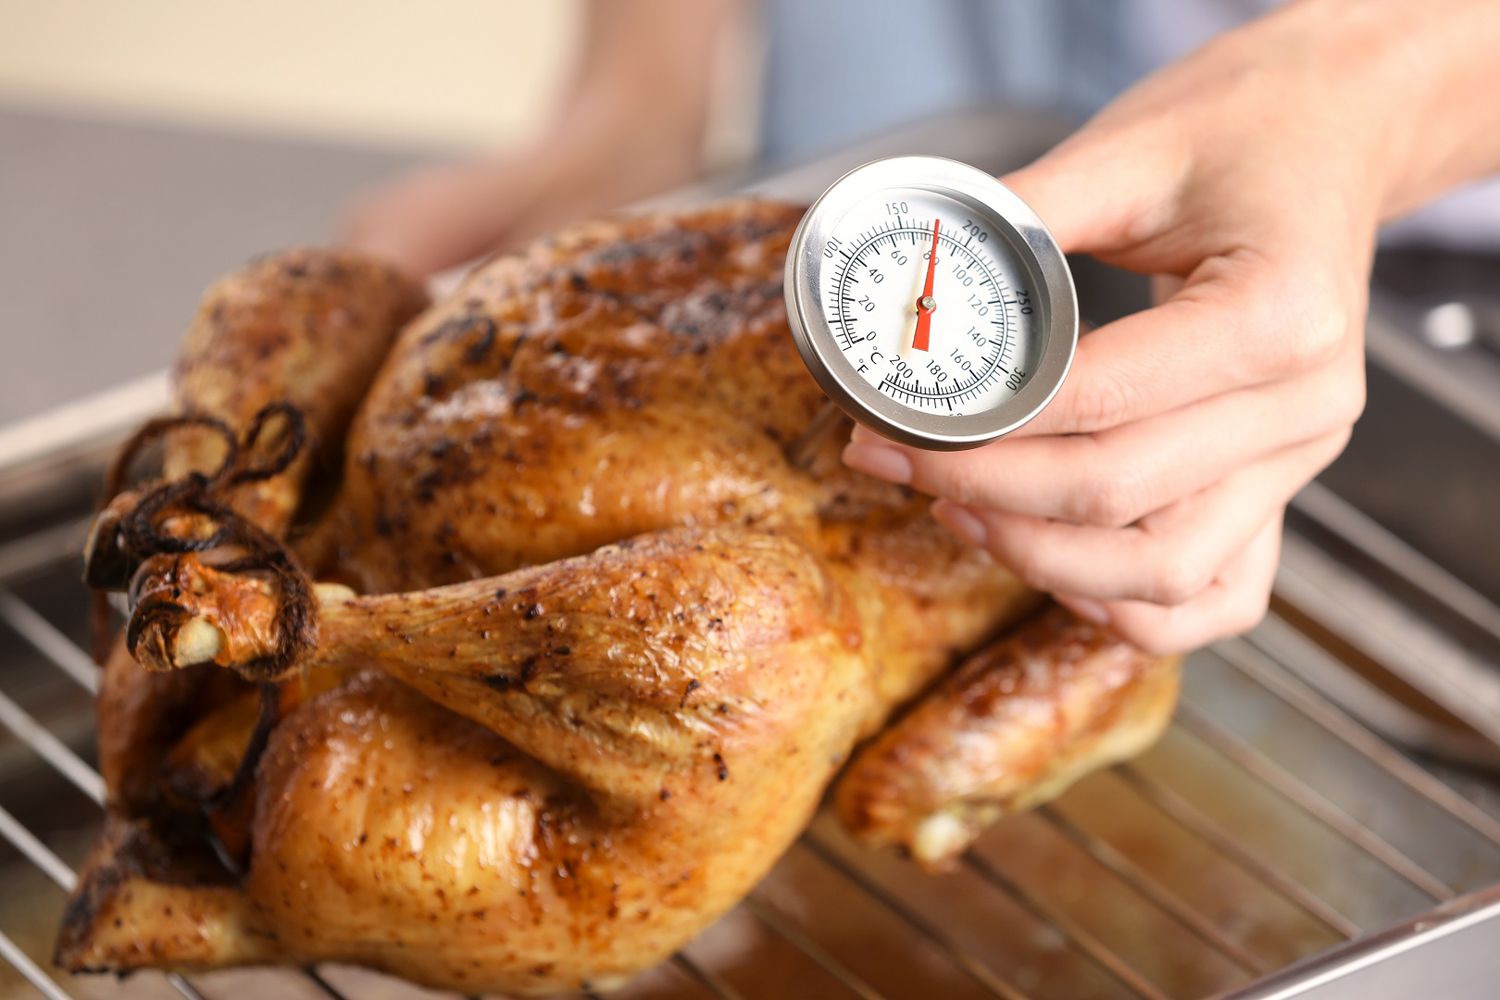 Roasted Turkey With Food Thermometer Check Temperature